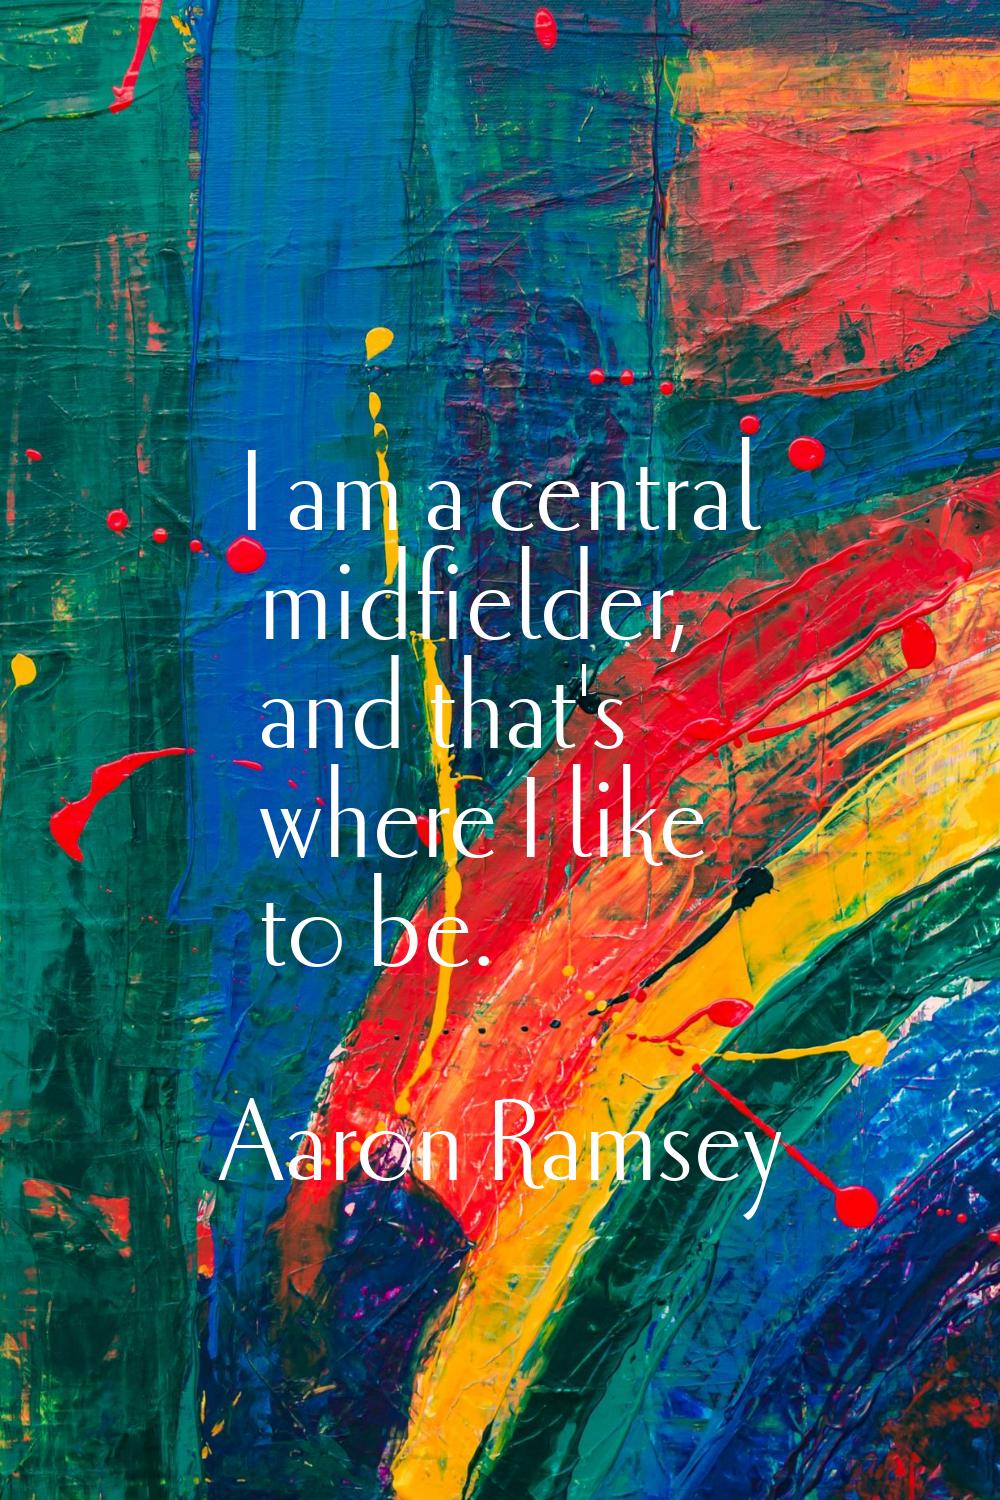 I am a central midfielder, and that's where I like to be.